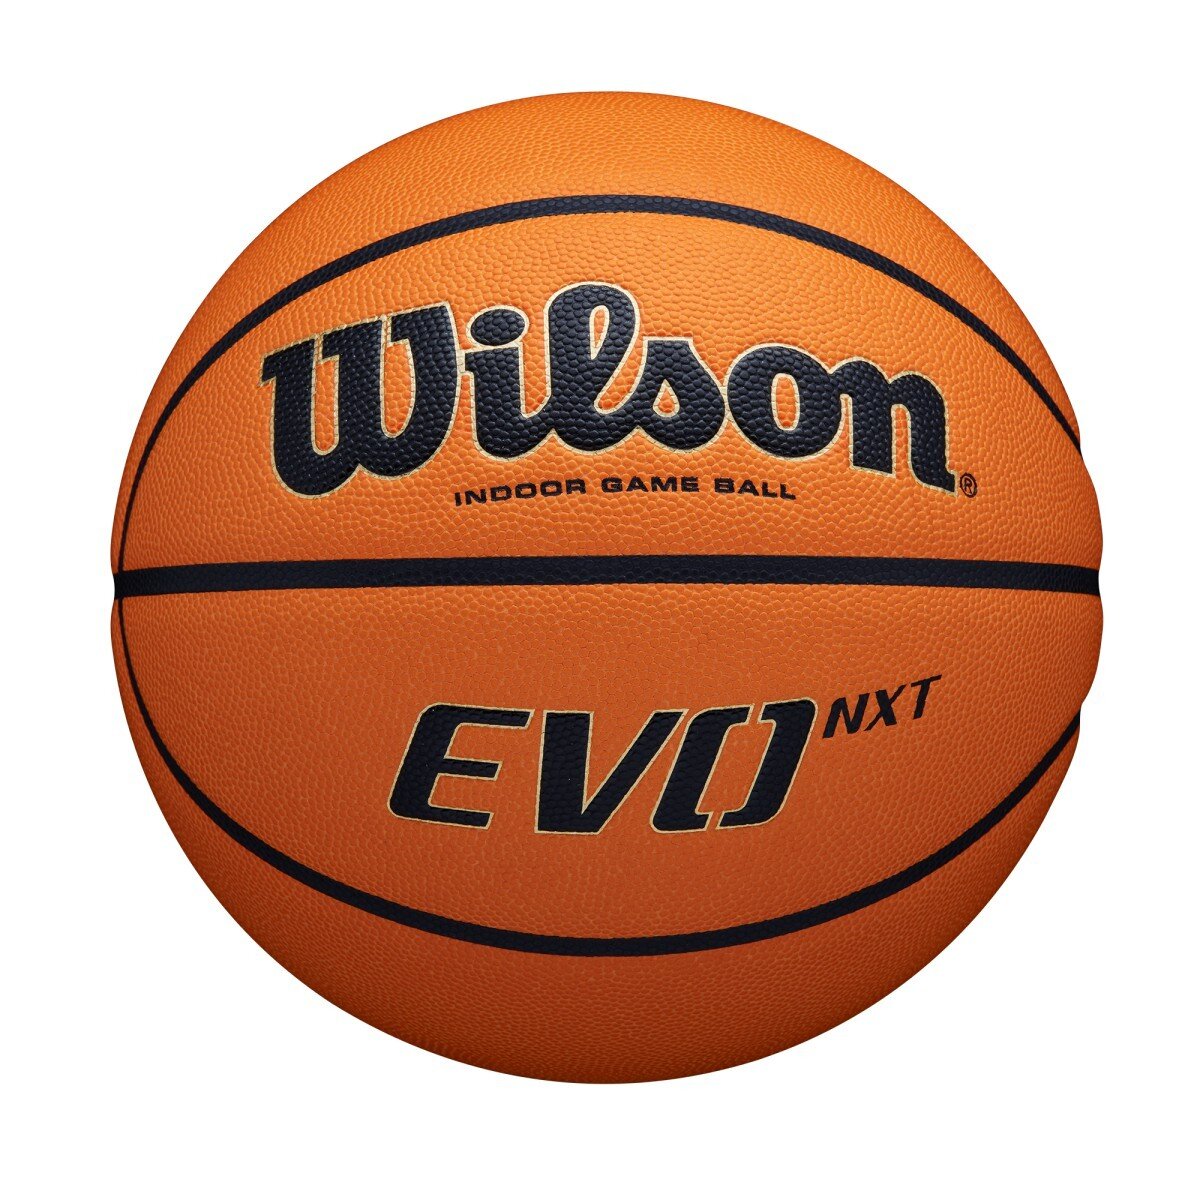 How to Break in the Wilson Official NBA Game Ball